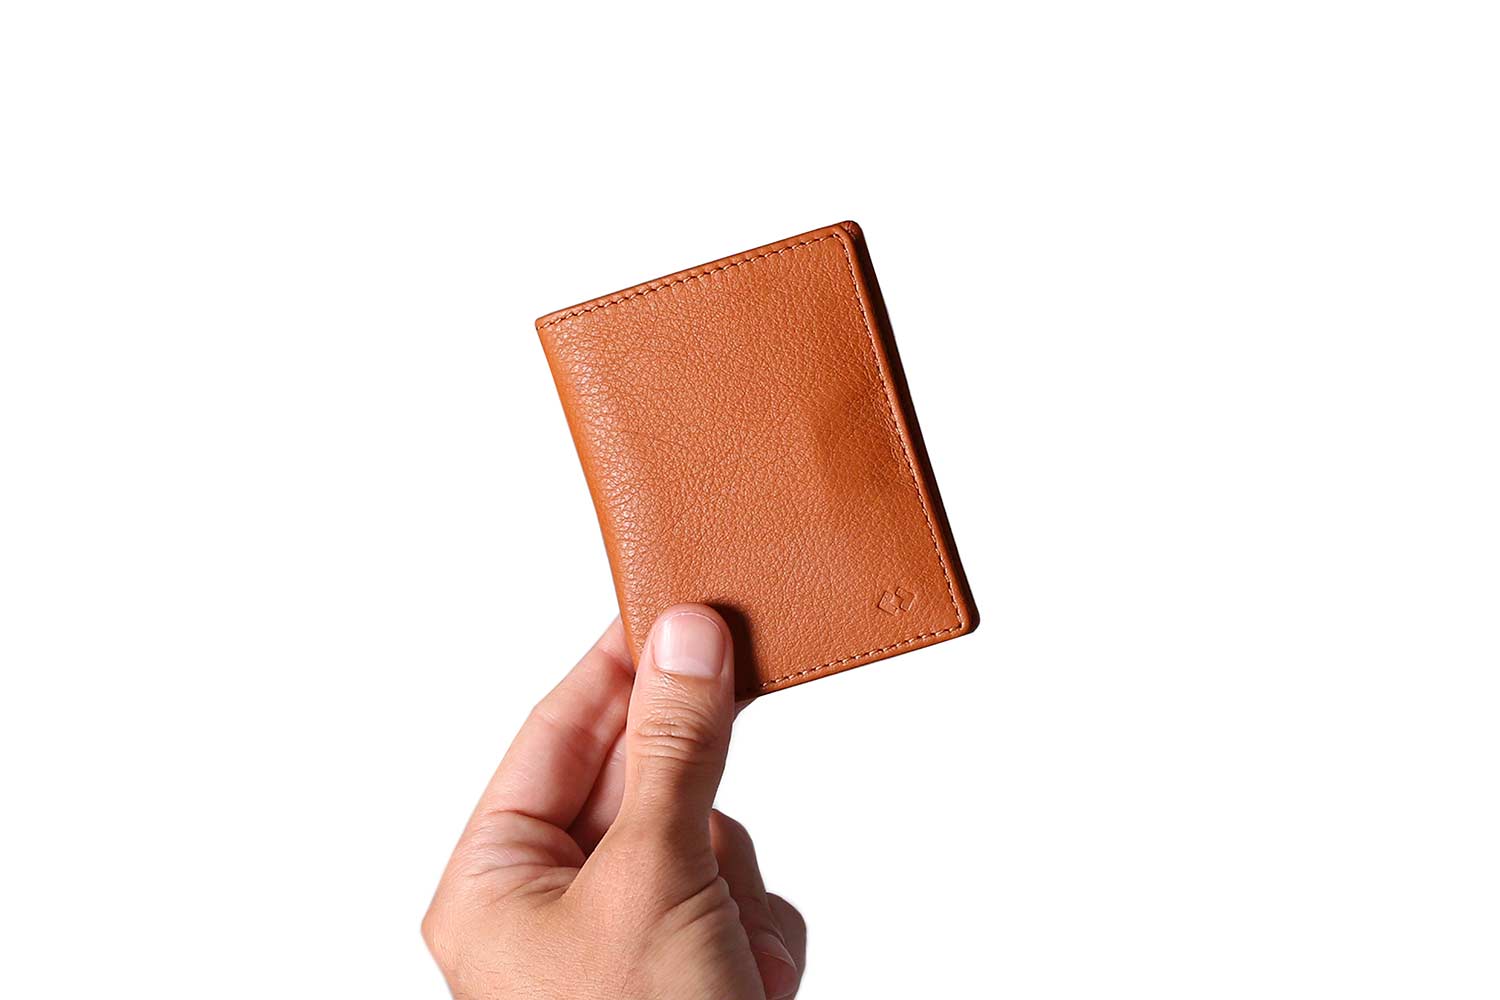 Card Wallet with RFID Protection